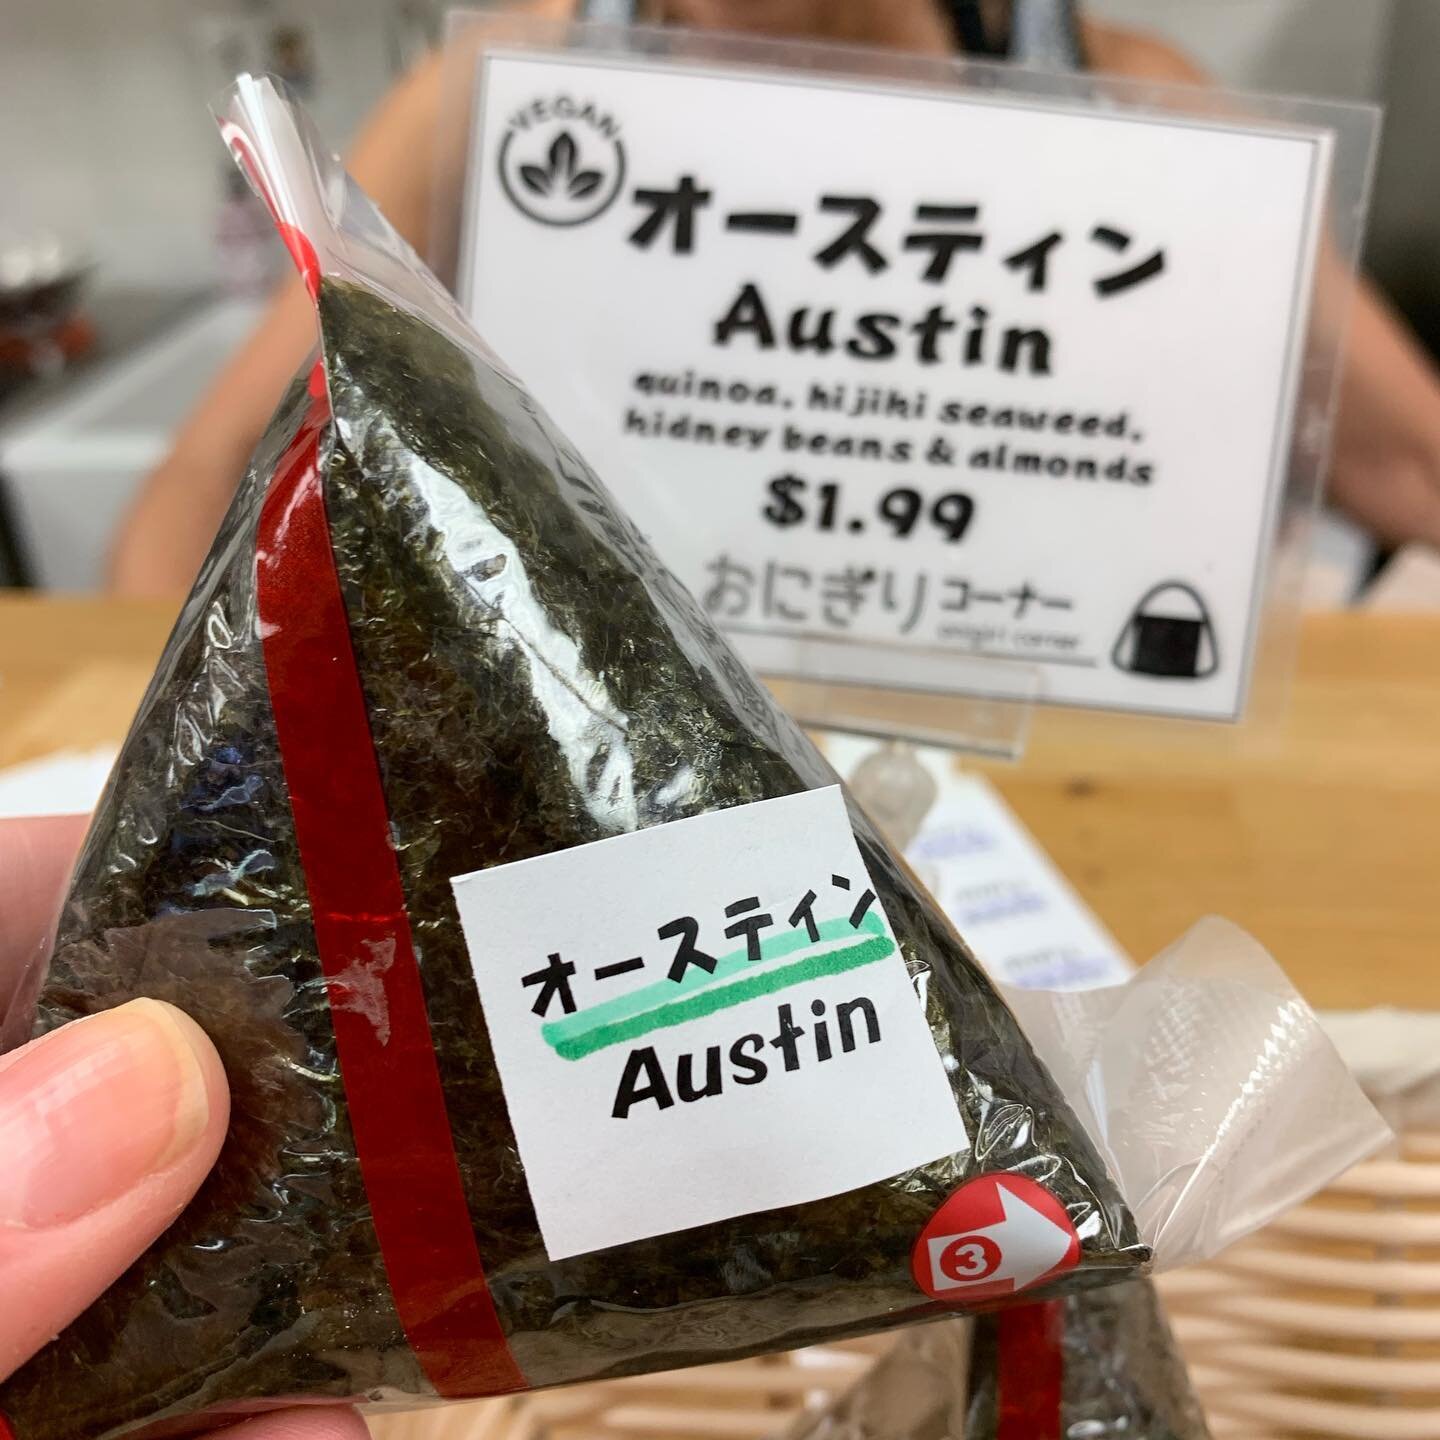 I love how @asahiimports in Austin really embraces the fusion of Japanese and Texan flavors. Their &ldquo;Austin onigiri&rdquo; includes a filling of quinoa, kidney beans, hijiki seaweed and almonds. .
.
.
.
#bento #austin #bentolunch #lunch #obento 